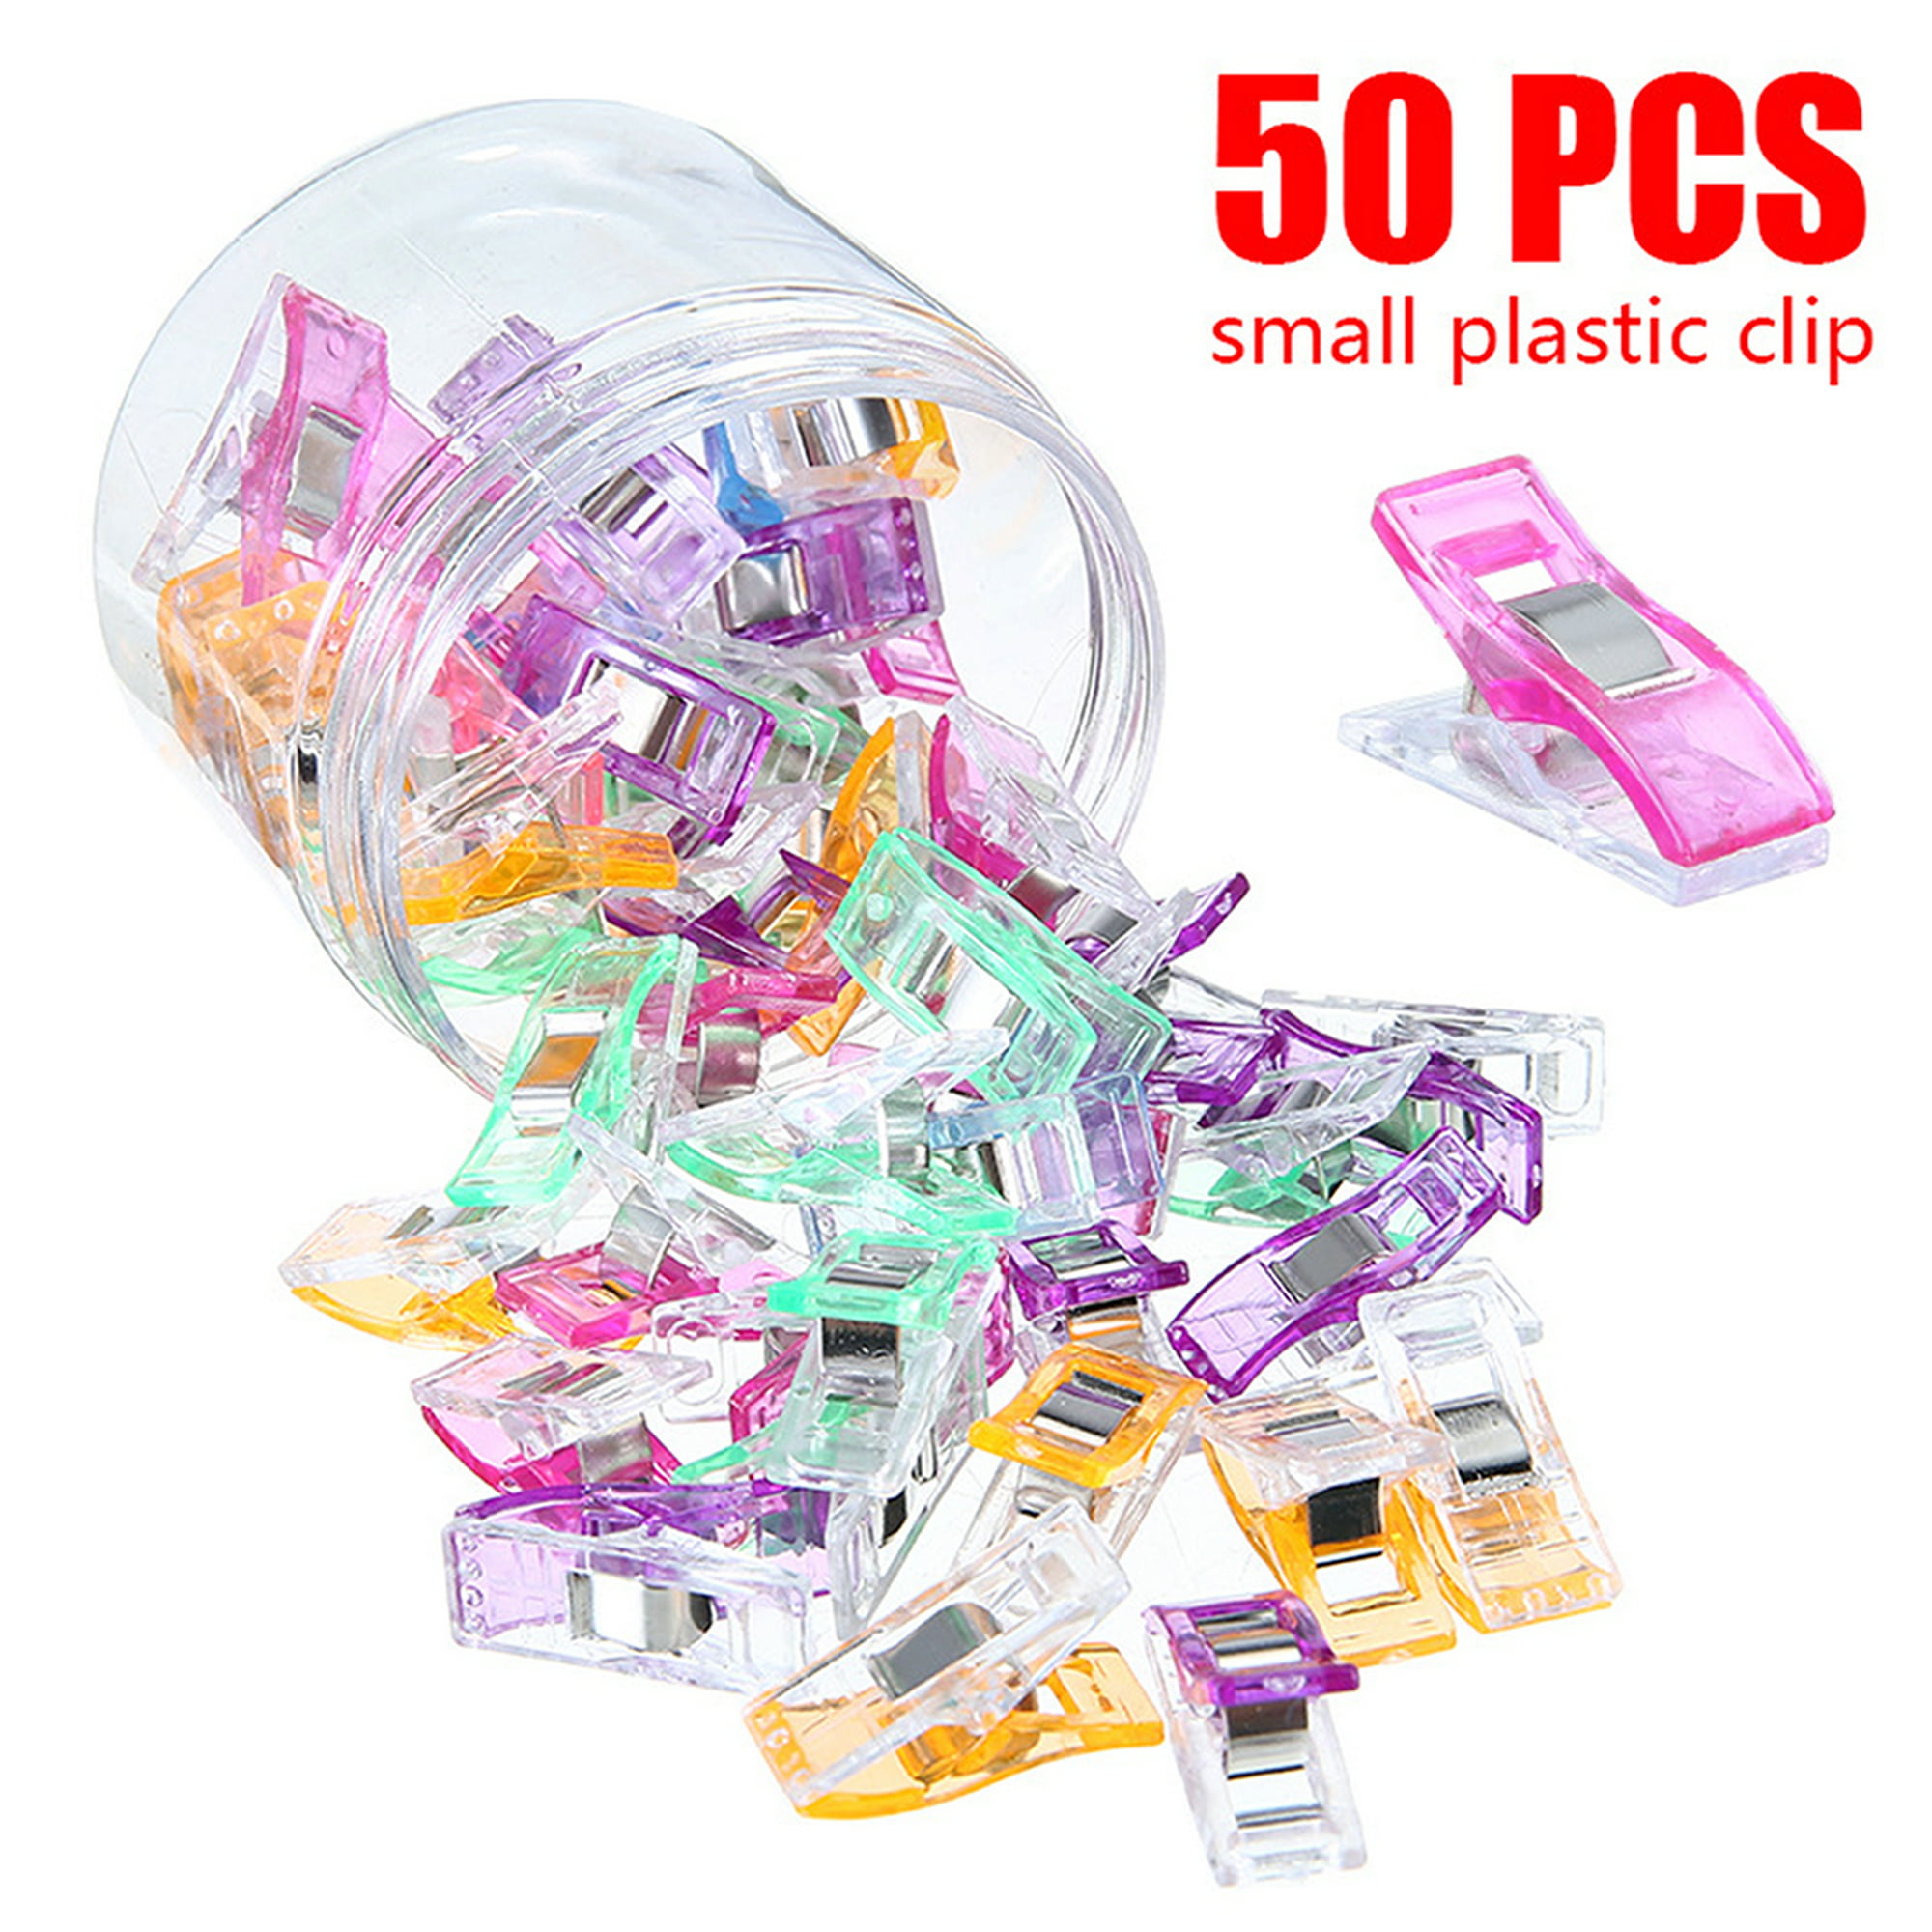 Pack of 50pcs Wonder Clips For Quilting Fabric Craft Knitting Sewing Crochet/